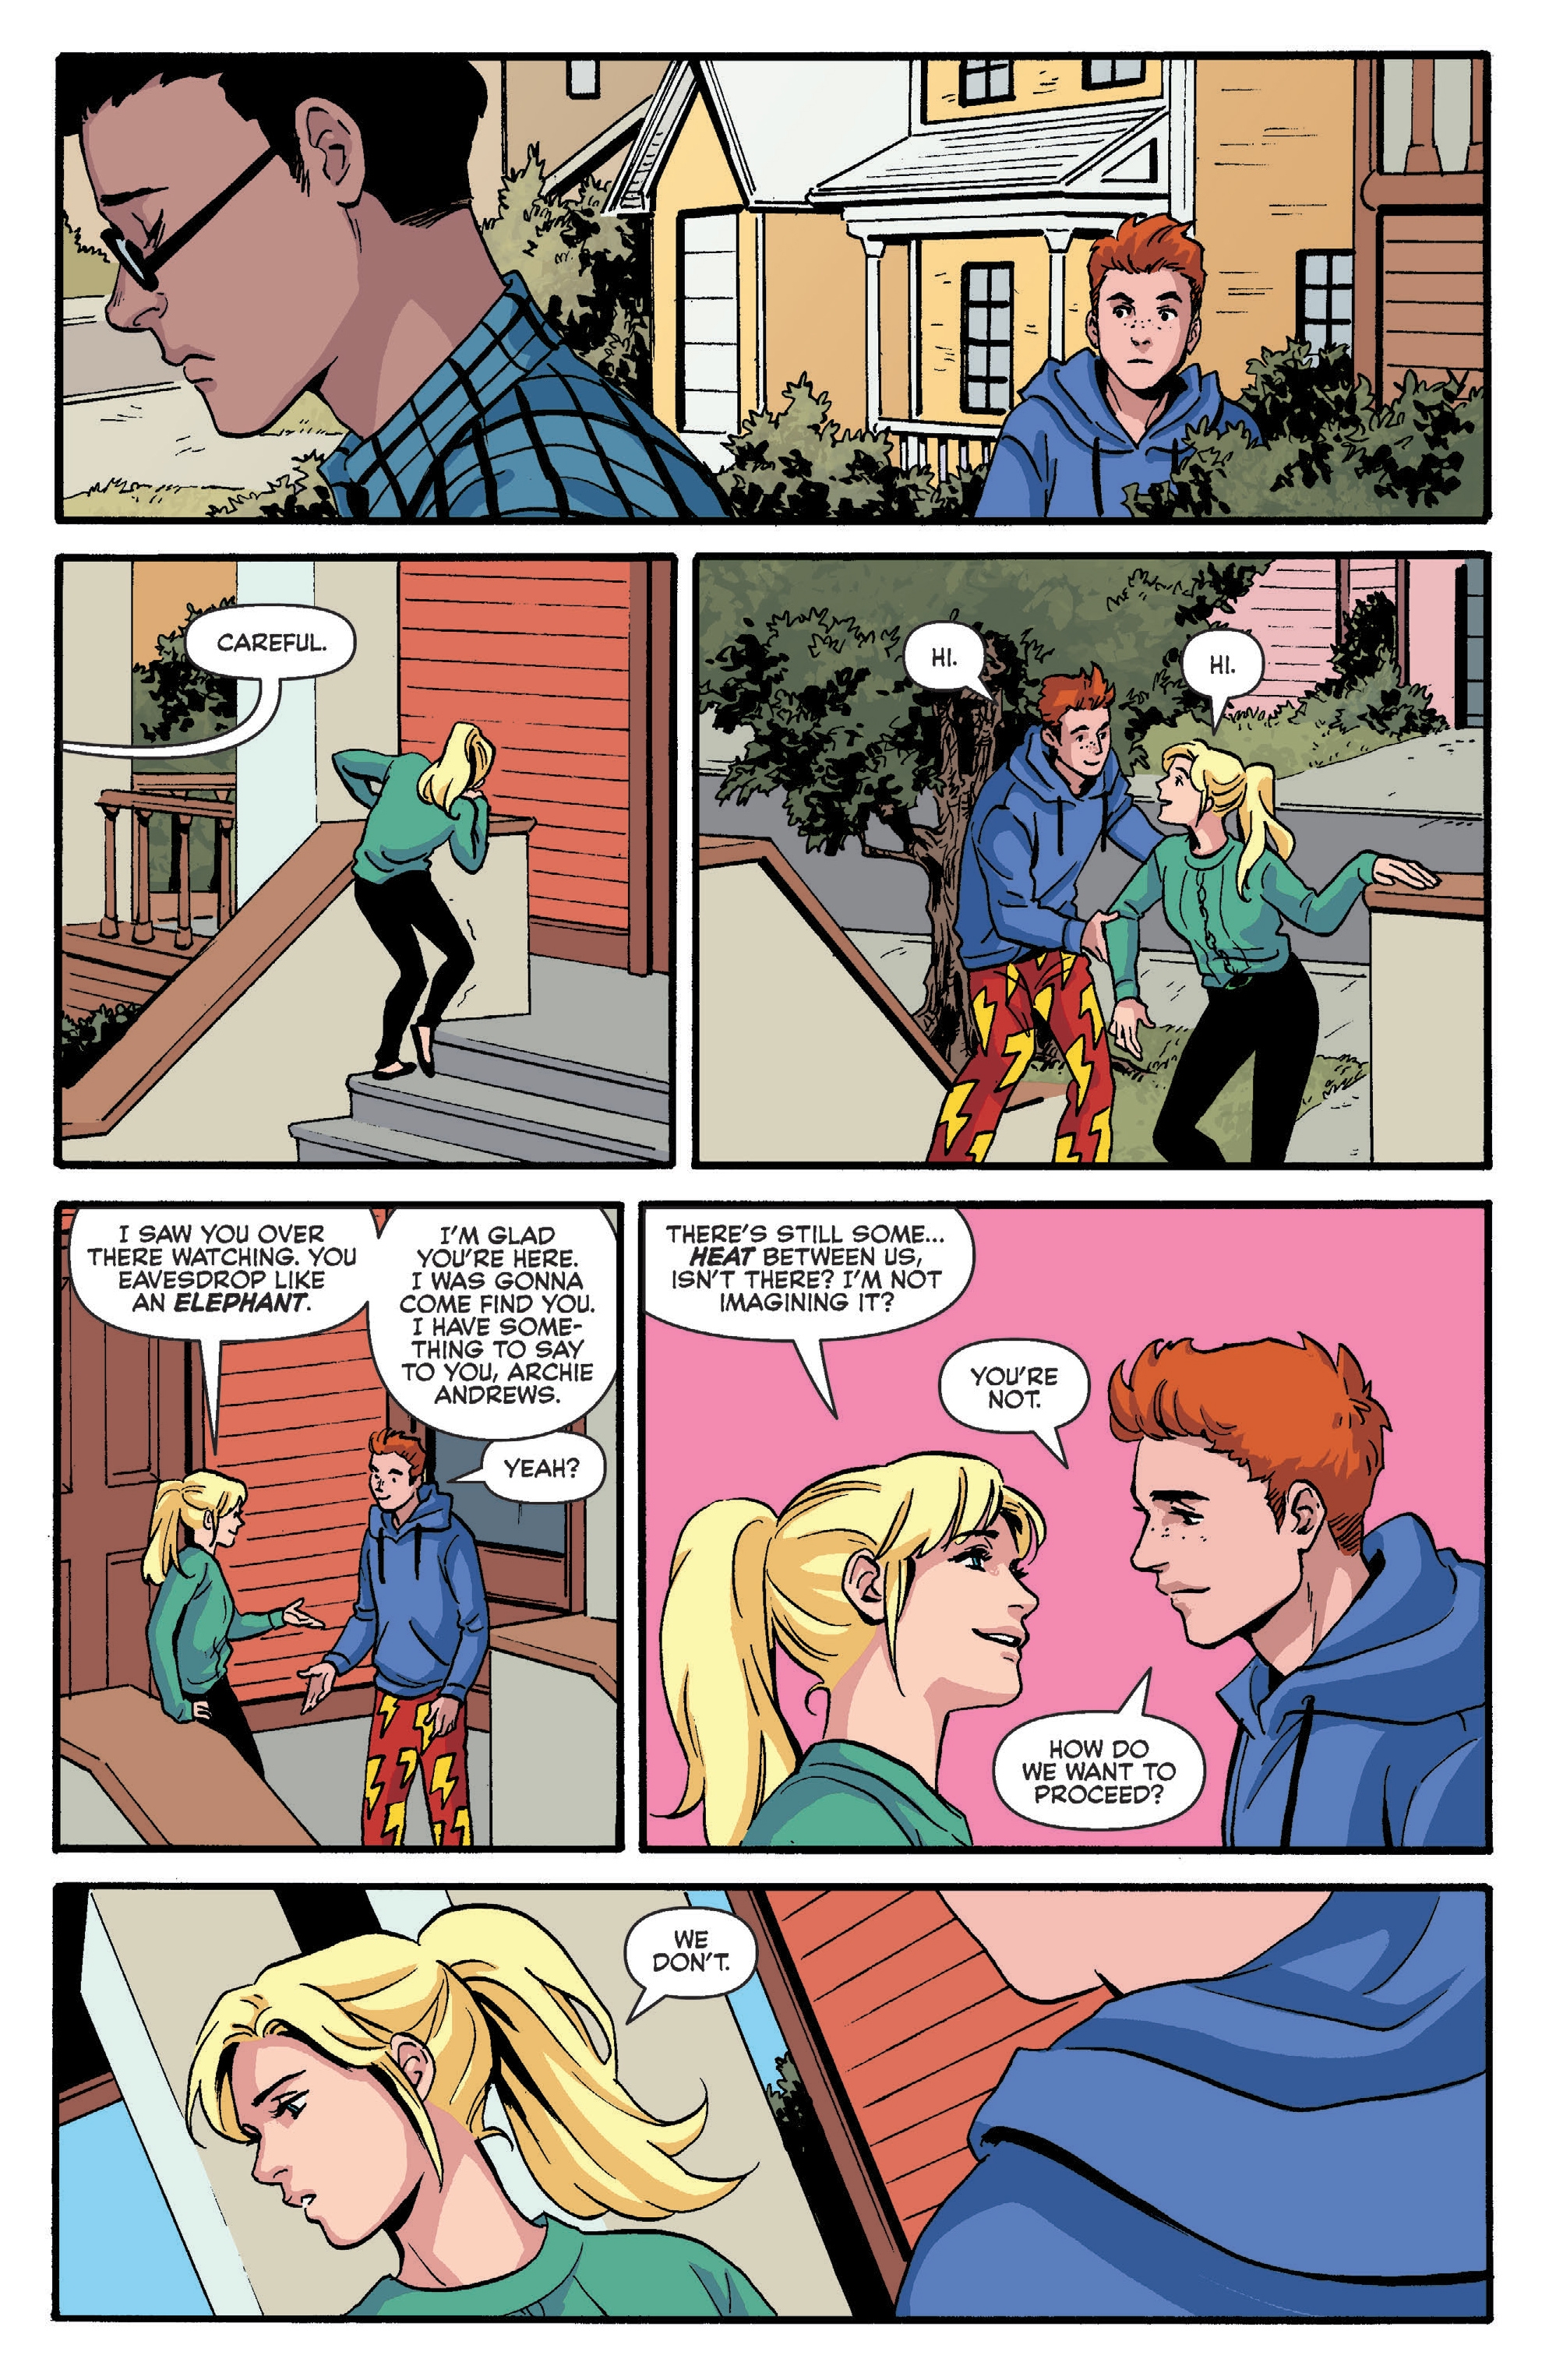 Why Betty Cooper Turned Down Archie Andrews